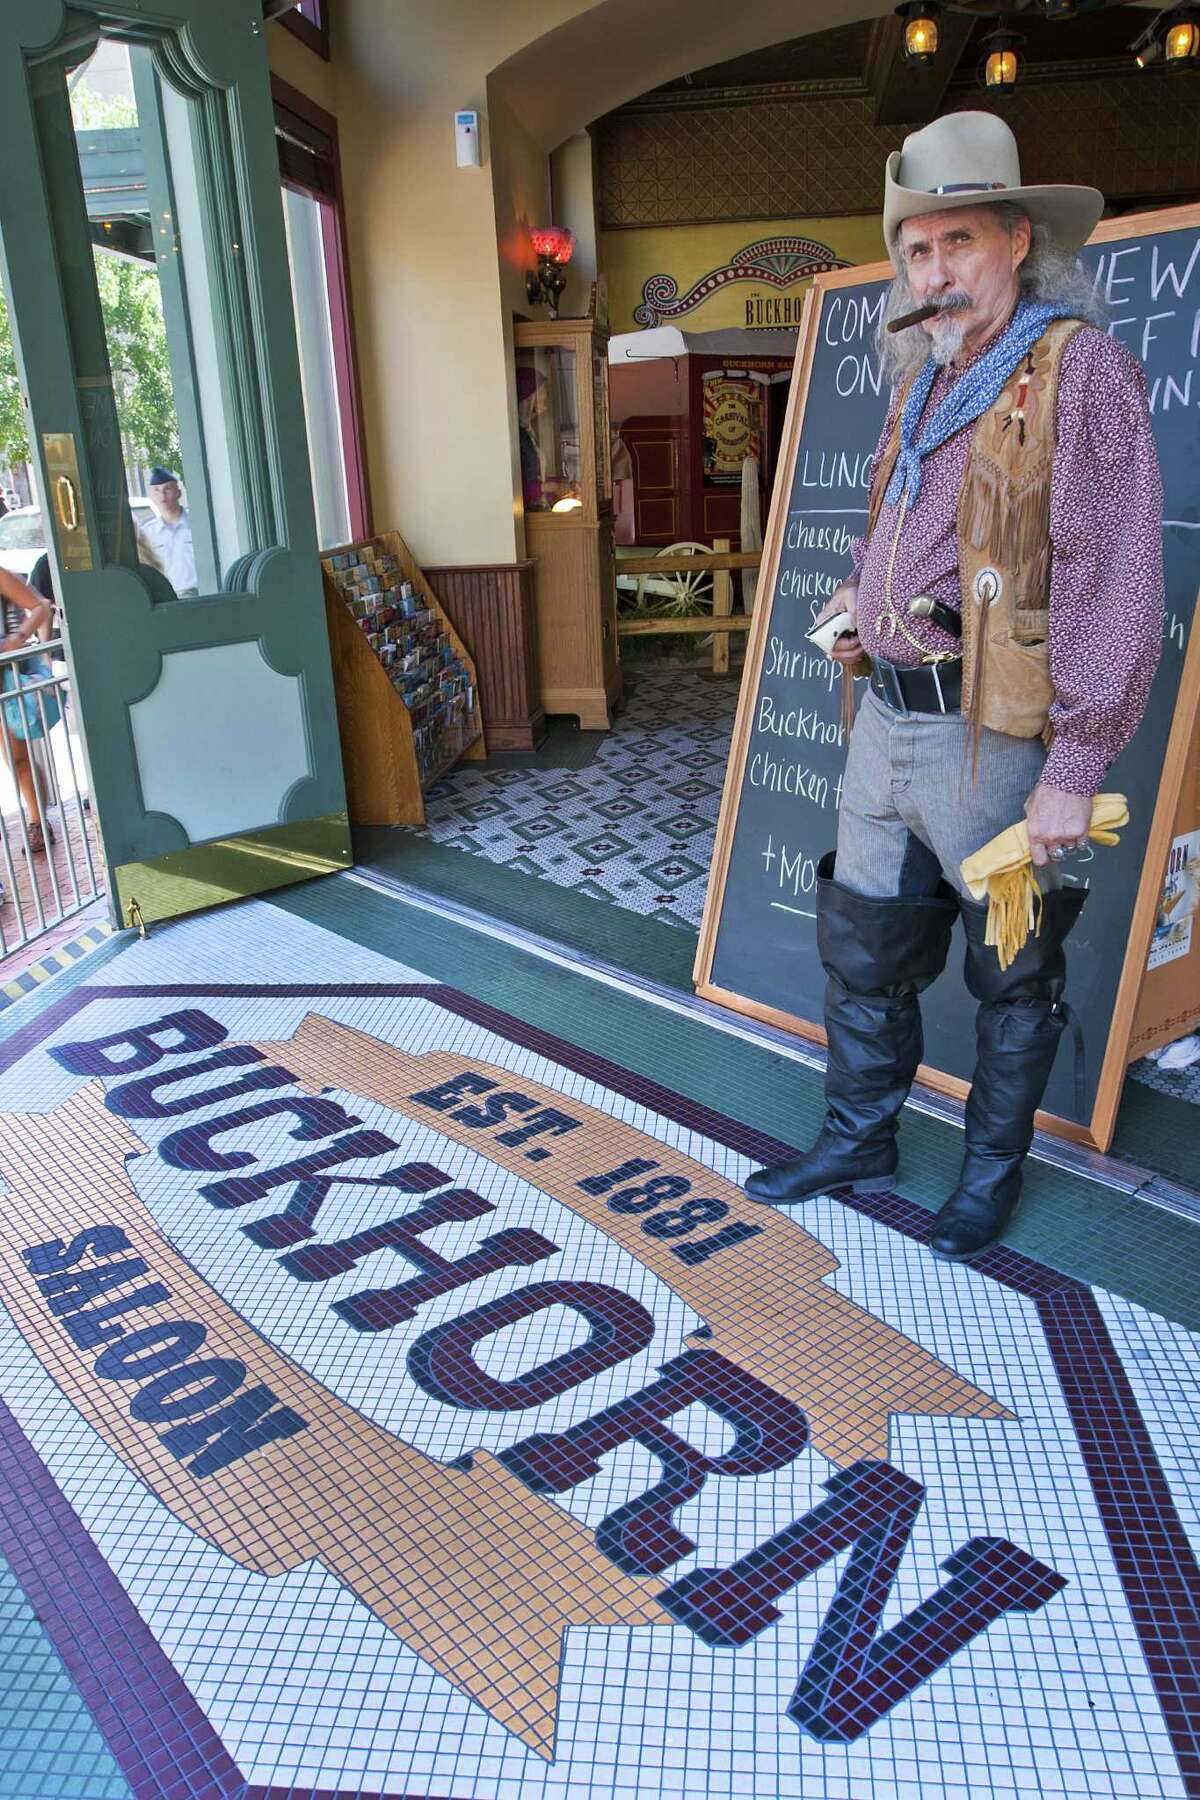 'Texas Bob' Reinhardt, who bears a strong resemblance to legendary scout and showman “Buffalo Bill” Cody, is head greeter at the Buckhorn.